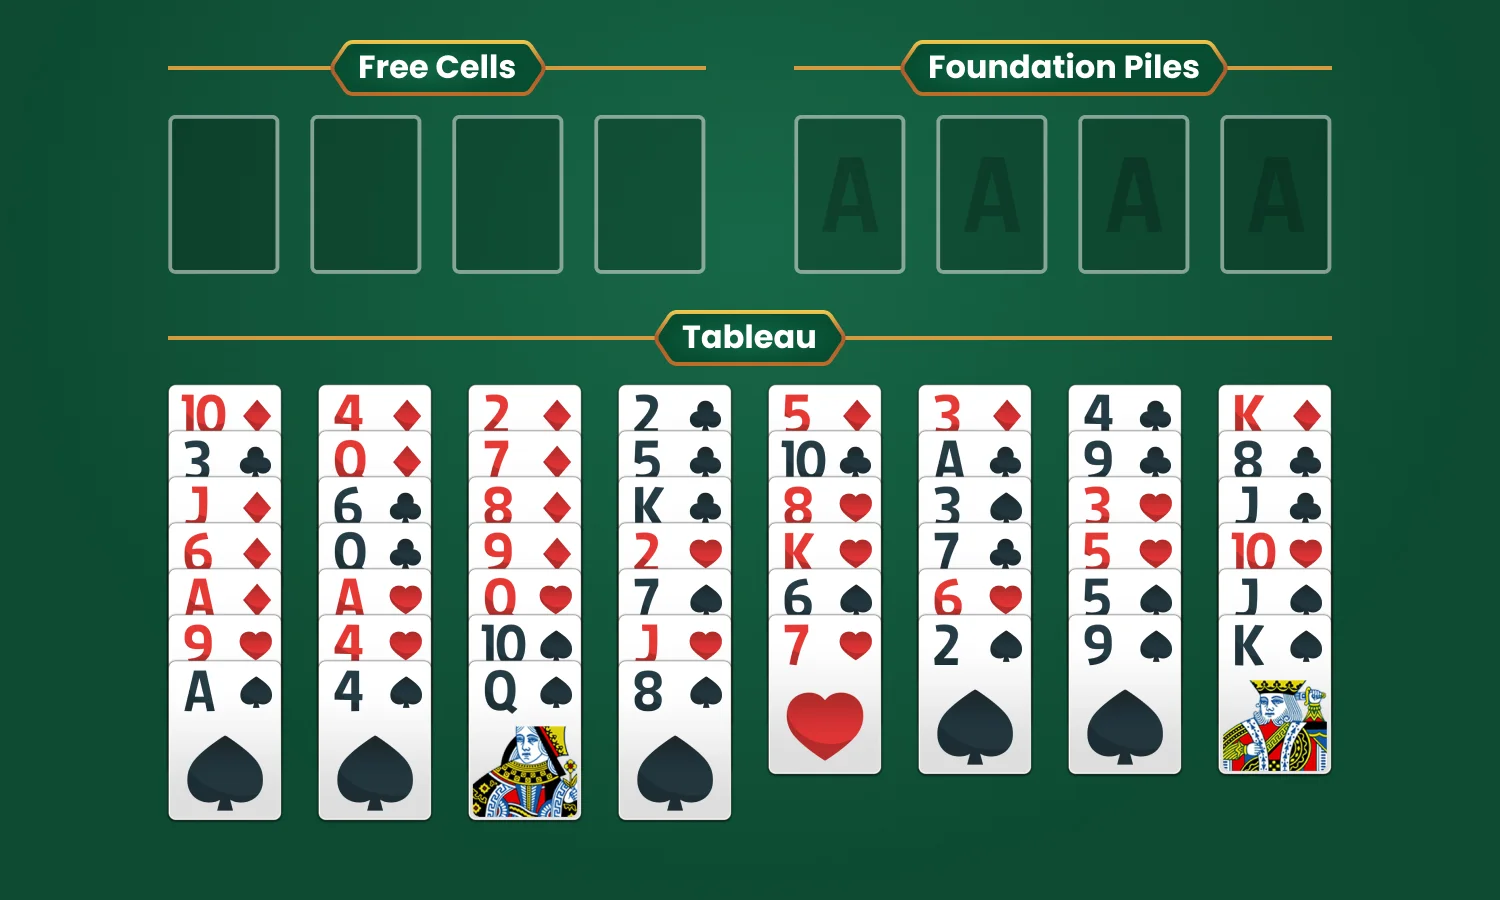 How to Play FreeCell Solitaire: Setting Up